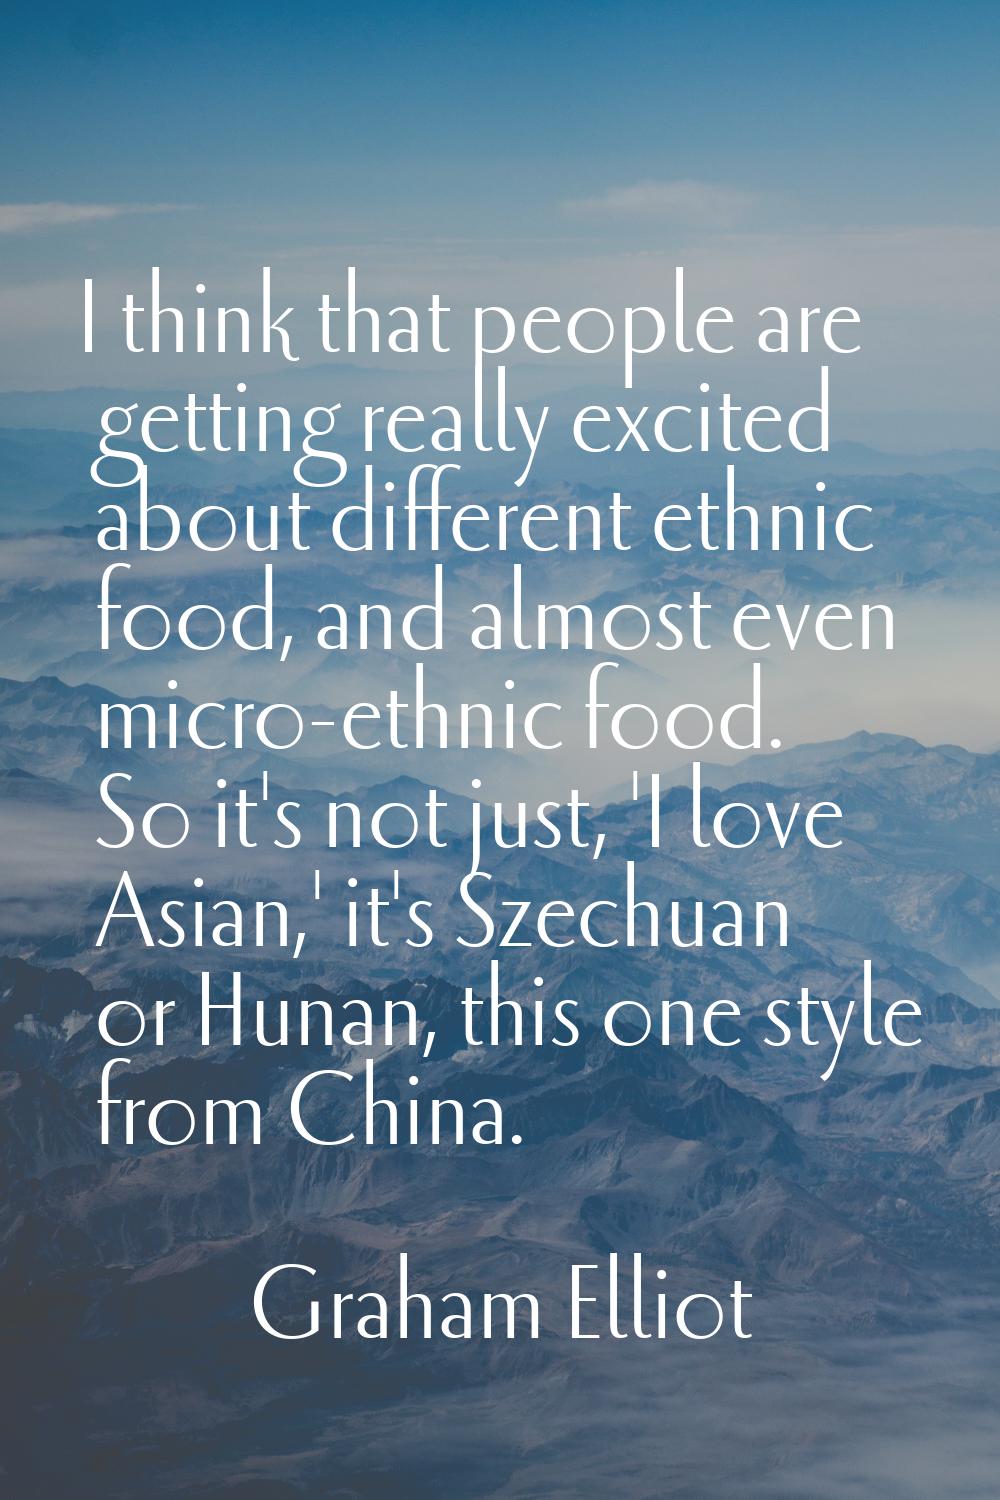 I think that people are getting really excited about different ethnic food, and almost even micro-e